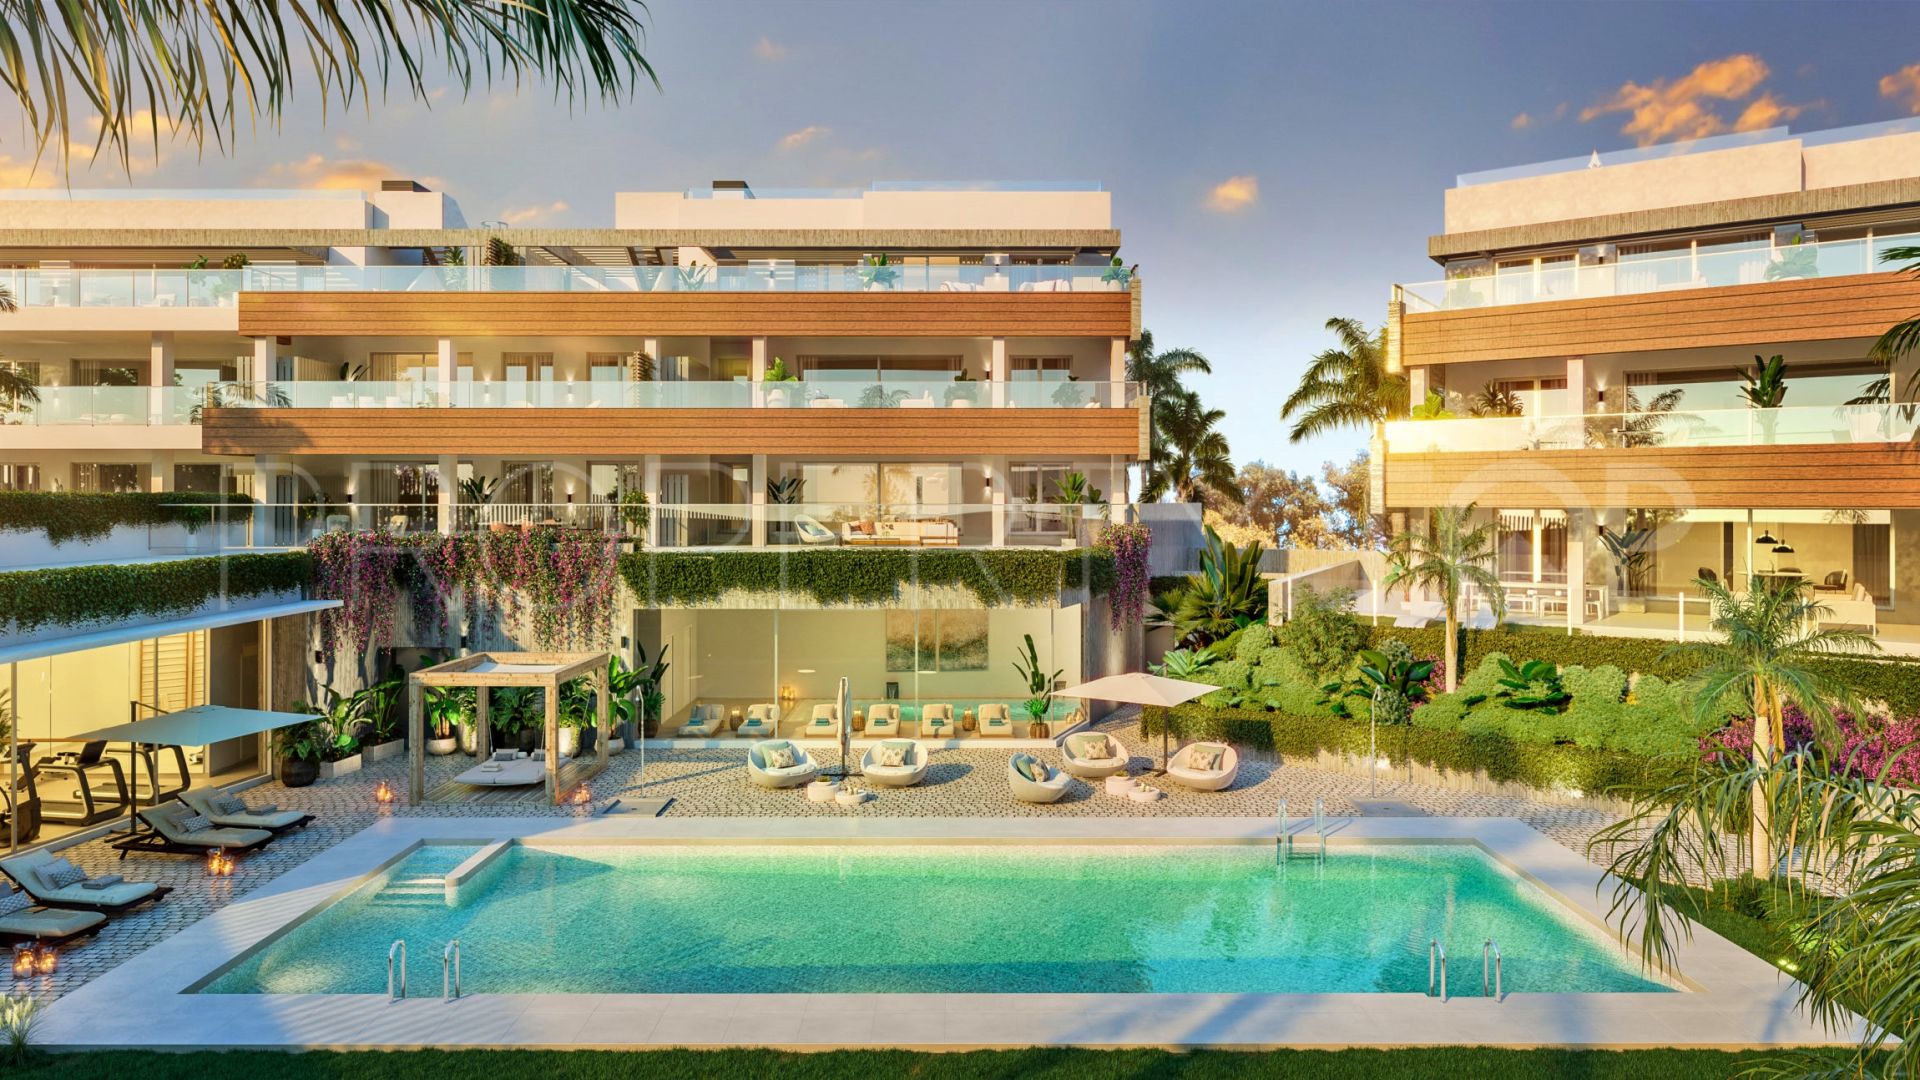 3 bedrooms apartment in Marbella City for sale